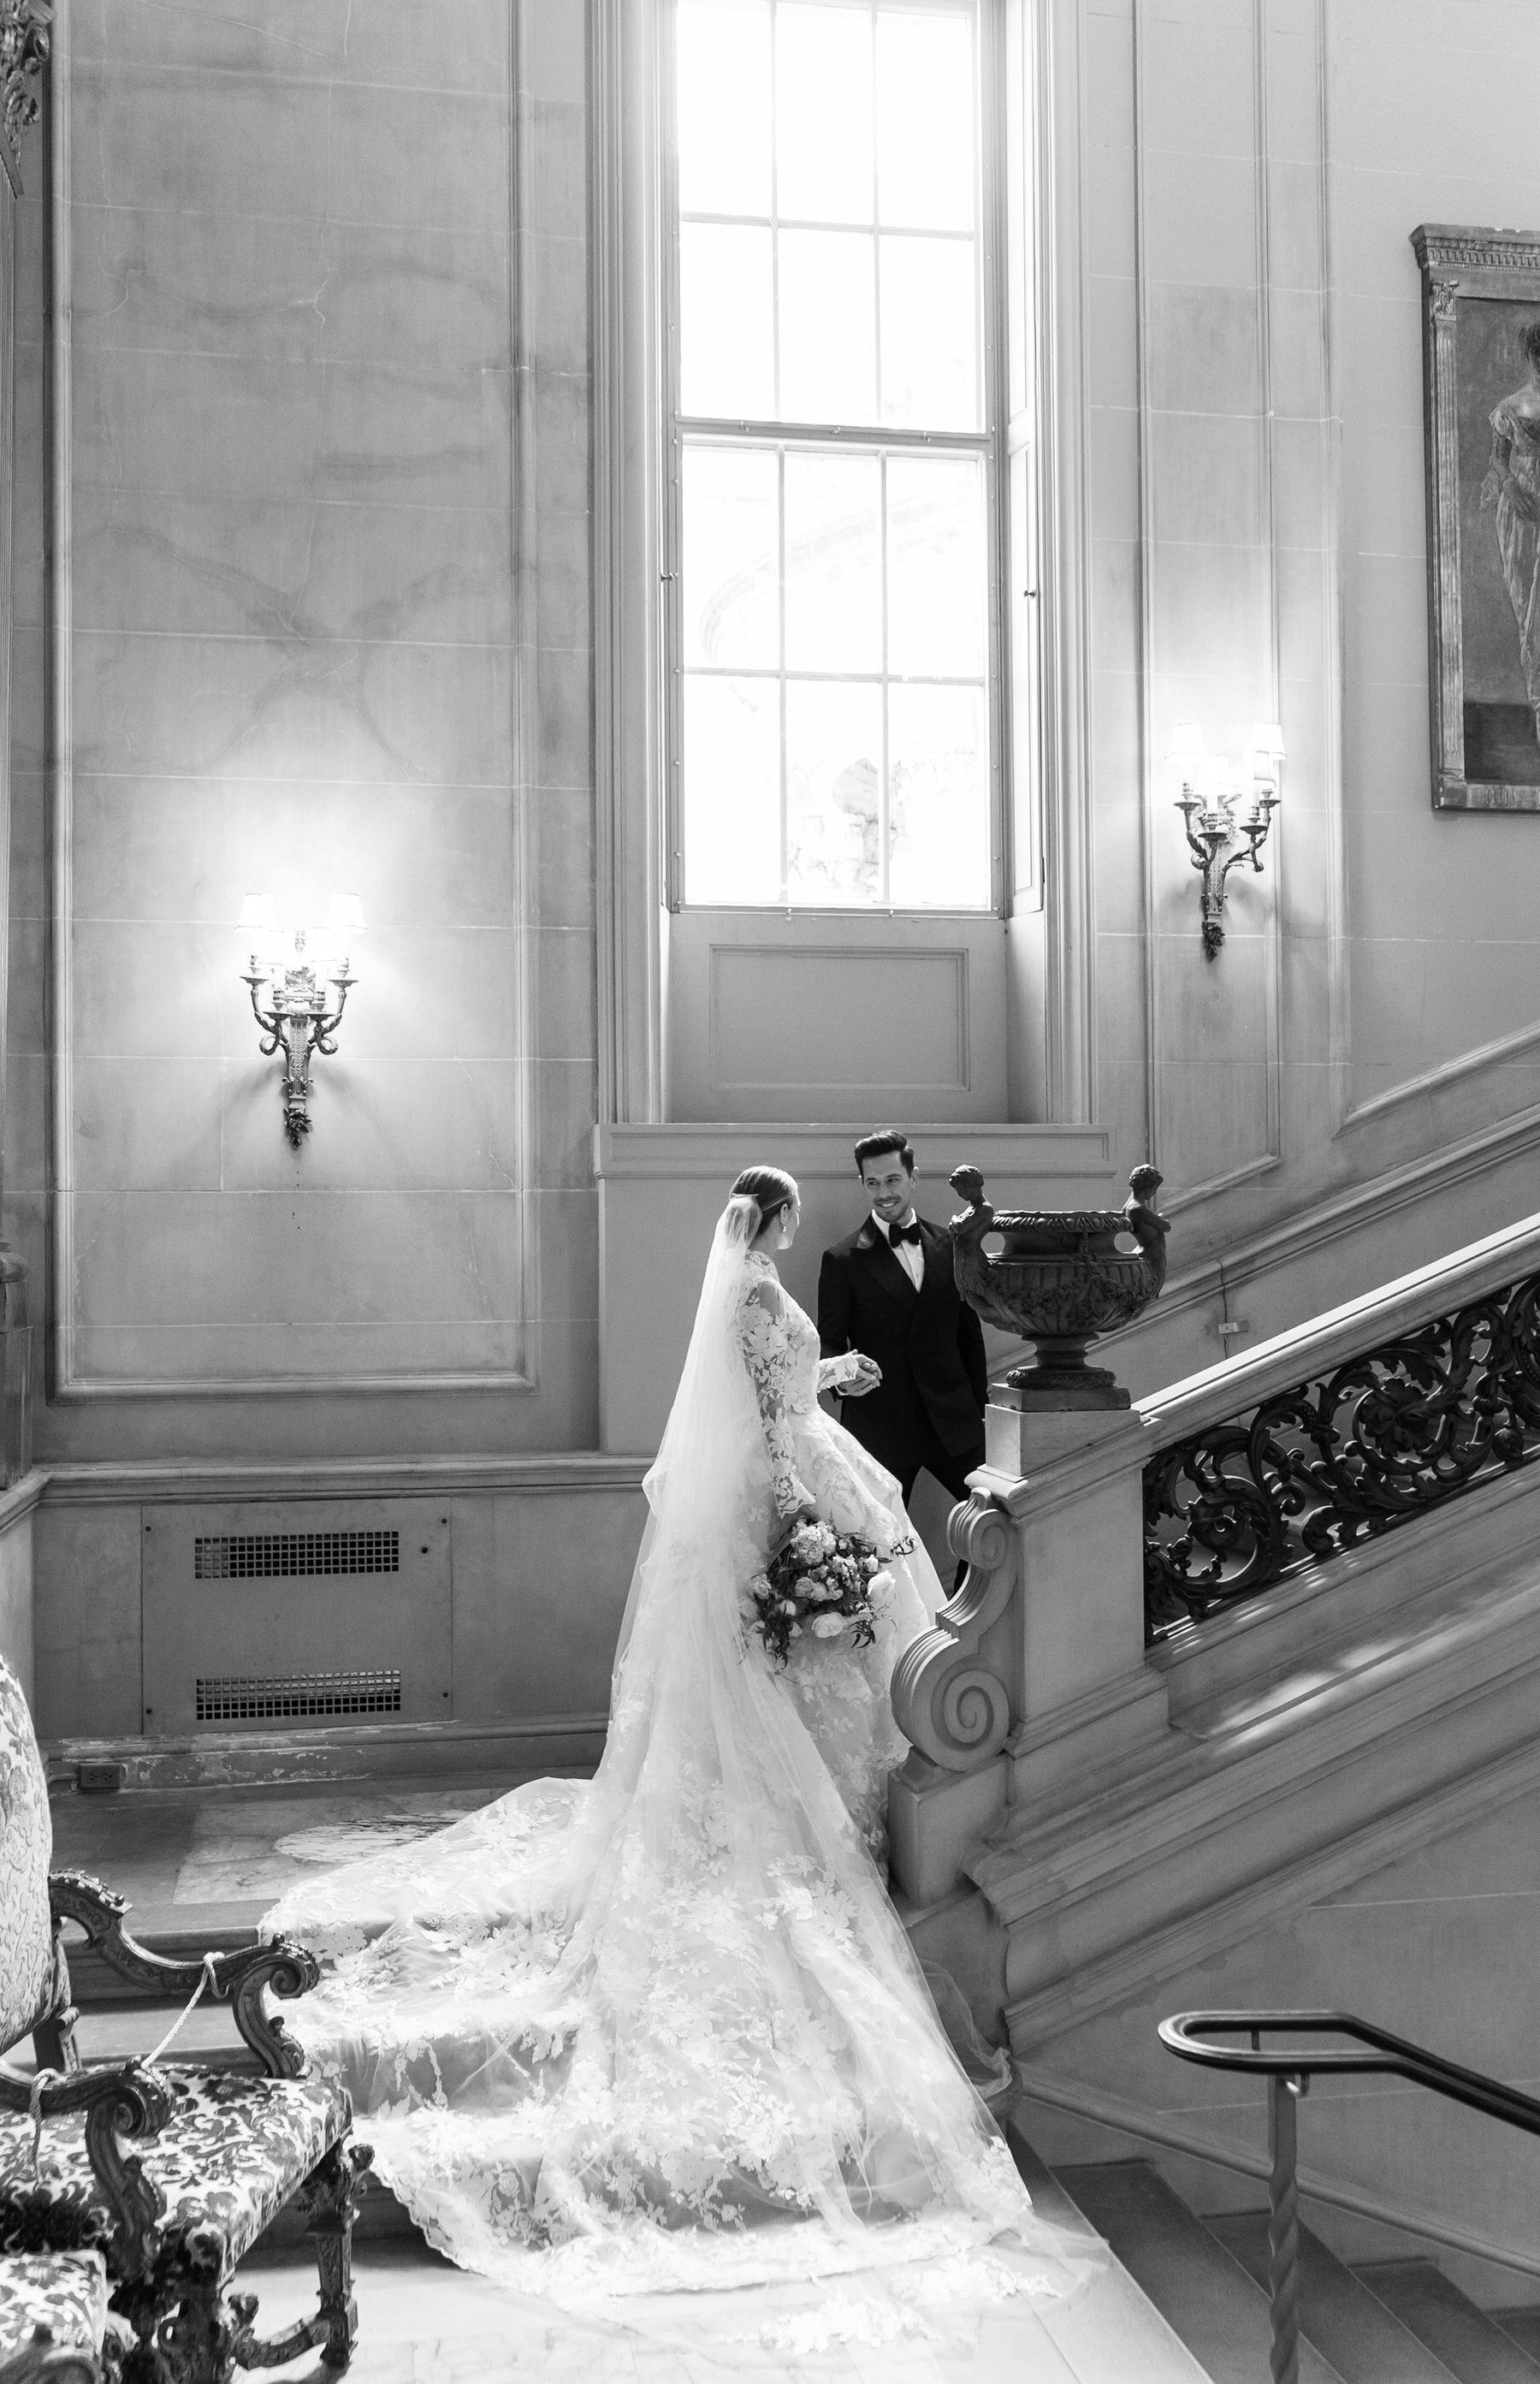 classic bride and groom on an elegant marble staircase